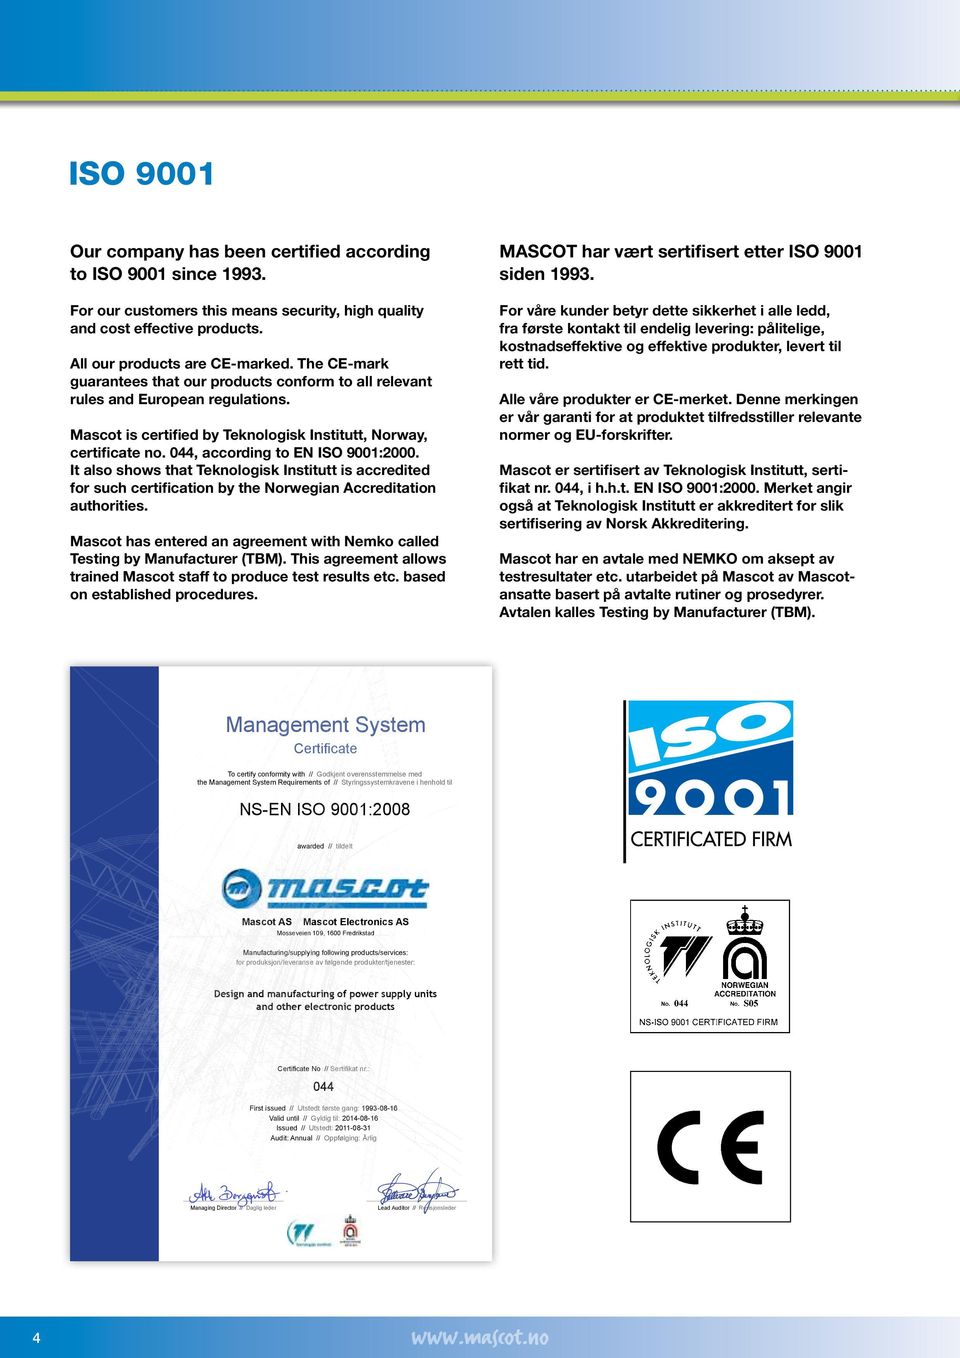 044, according to EN ISO 9001:2000. It also shows that Teknologisk Institutt is accredited for such certification by the Norwegian Accreditation authorities.